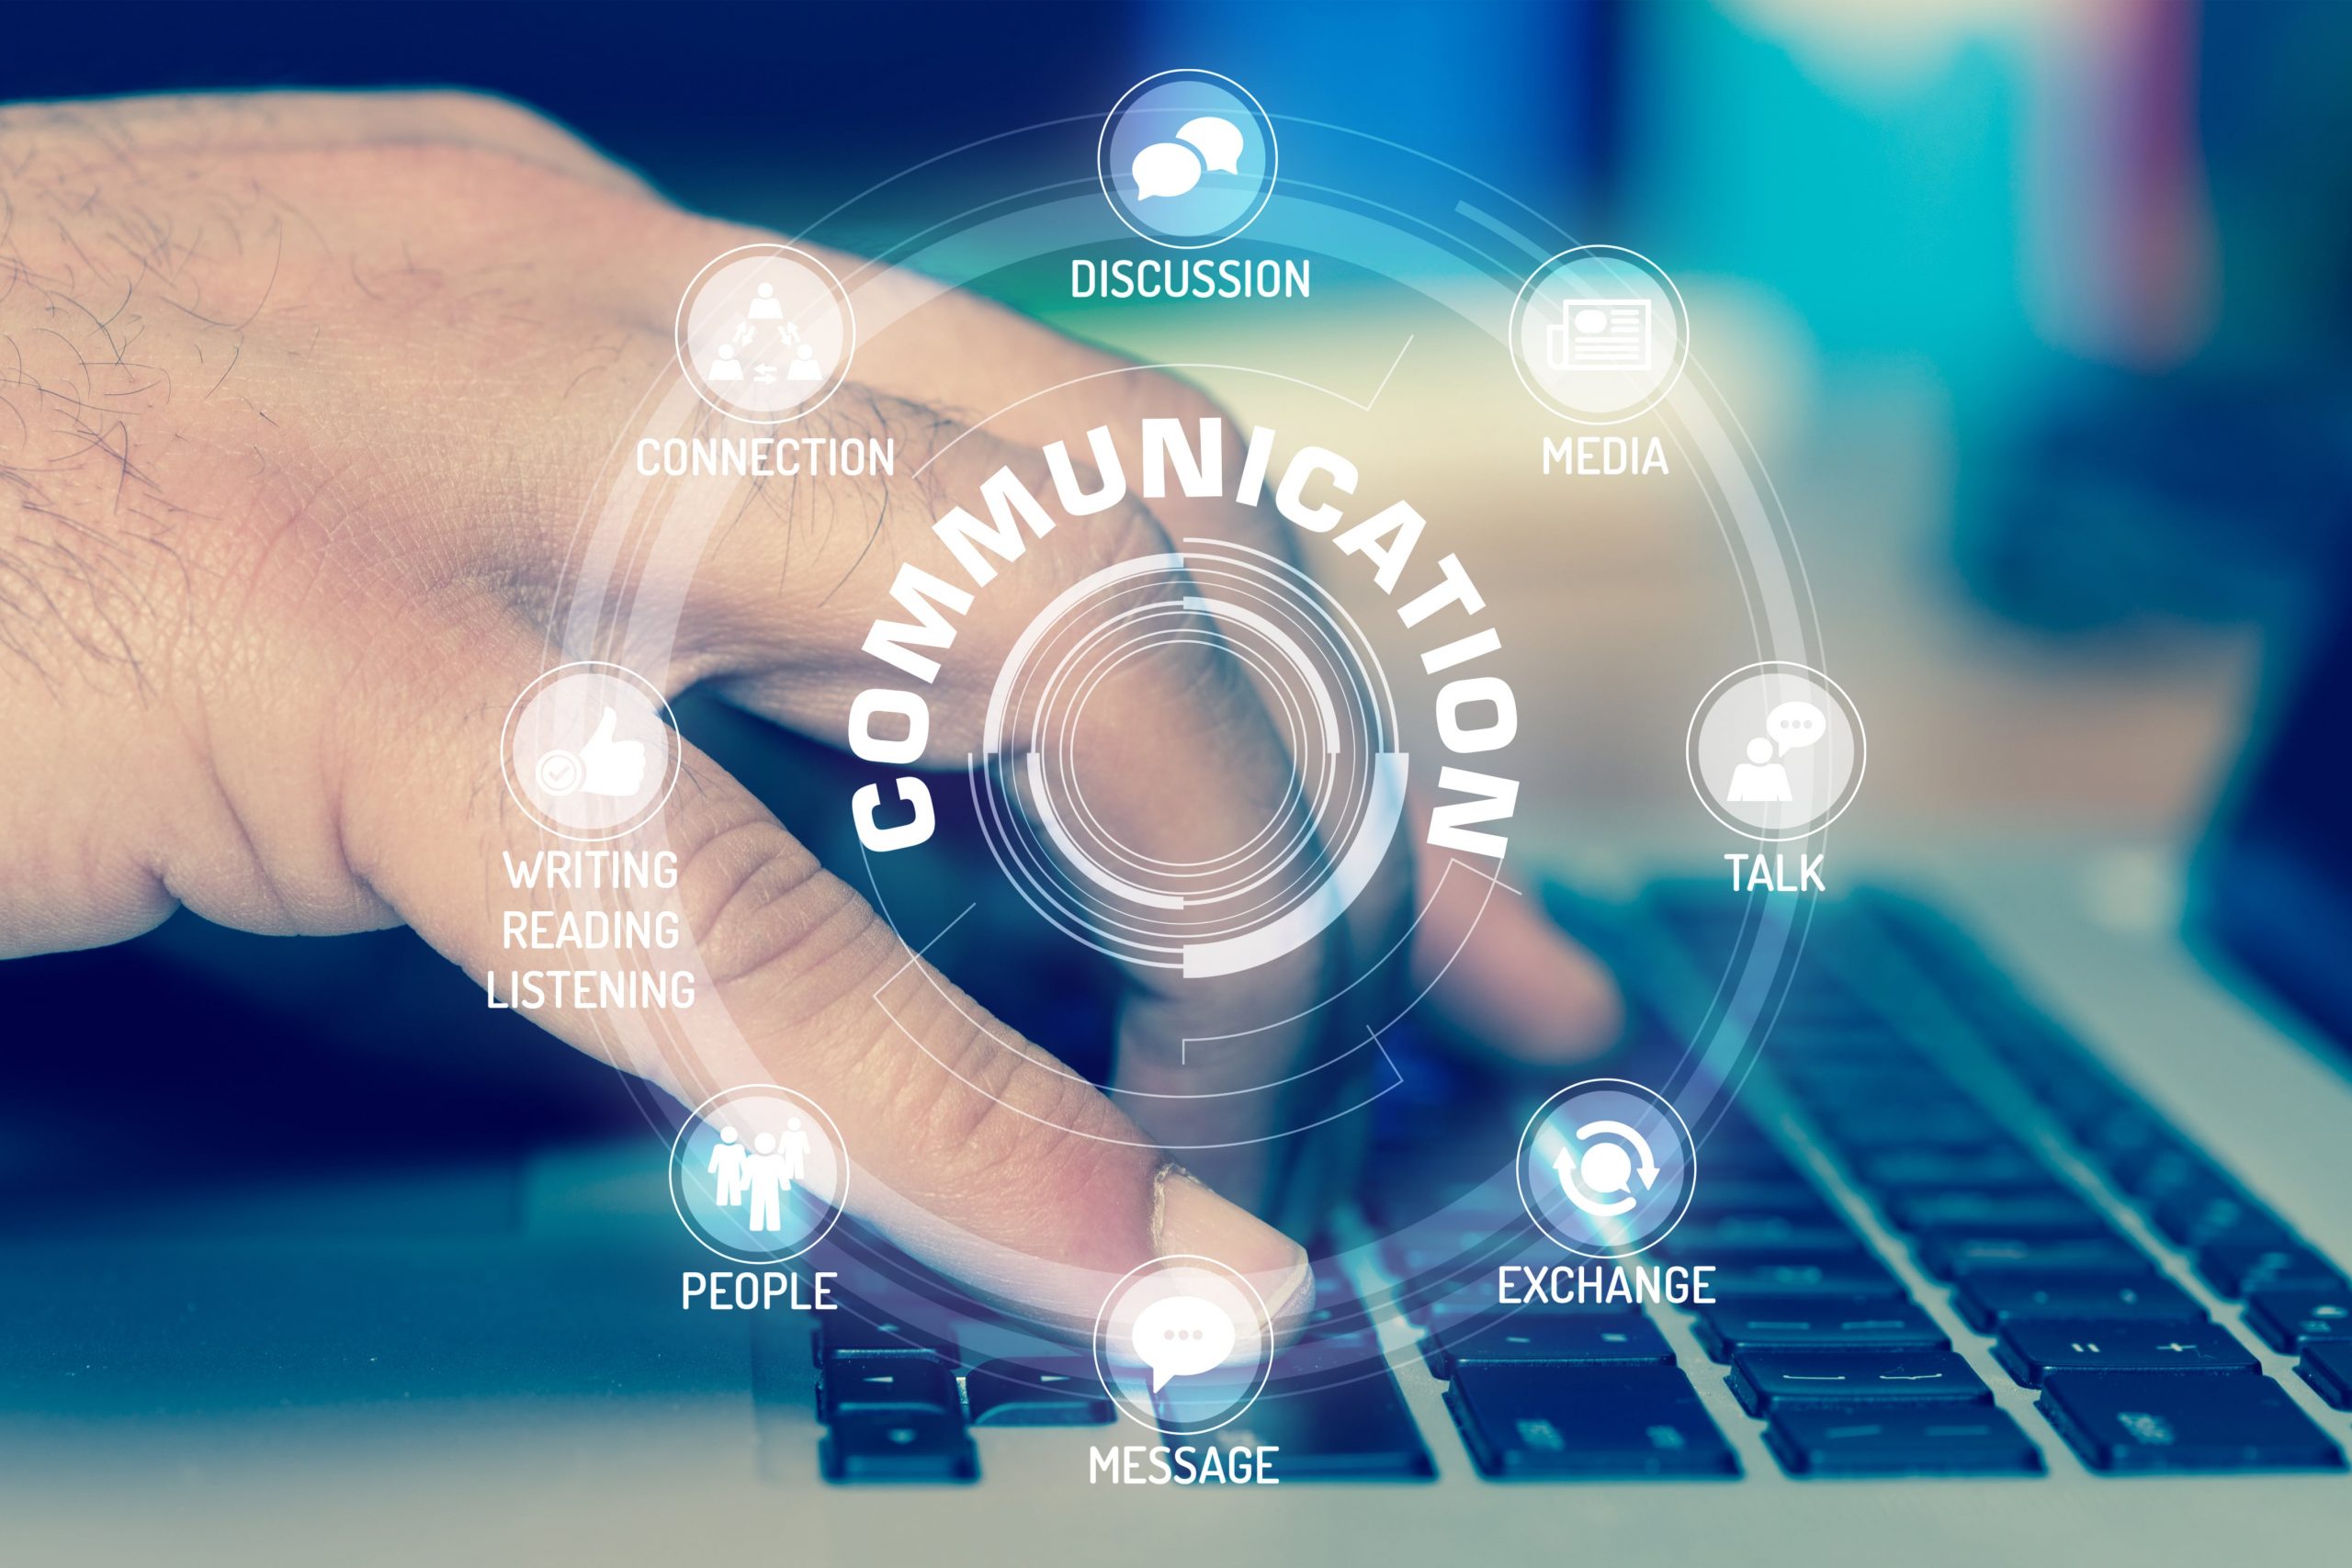 Unified Communication as a Service